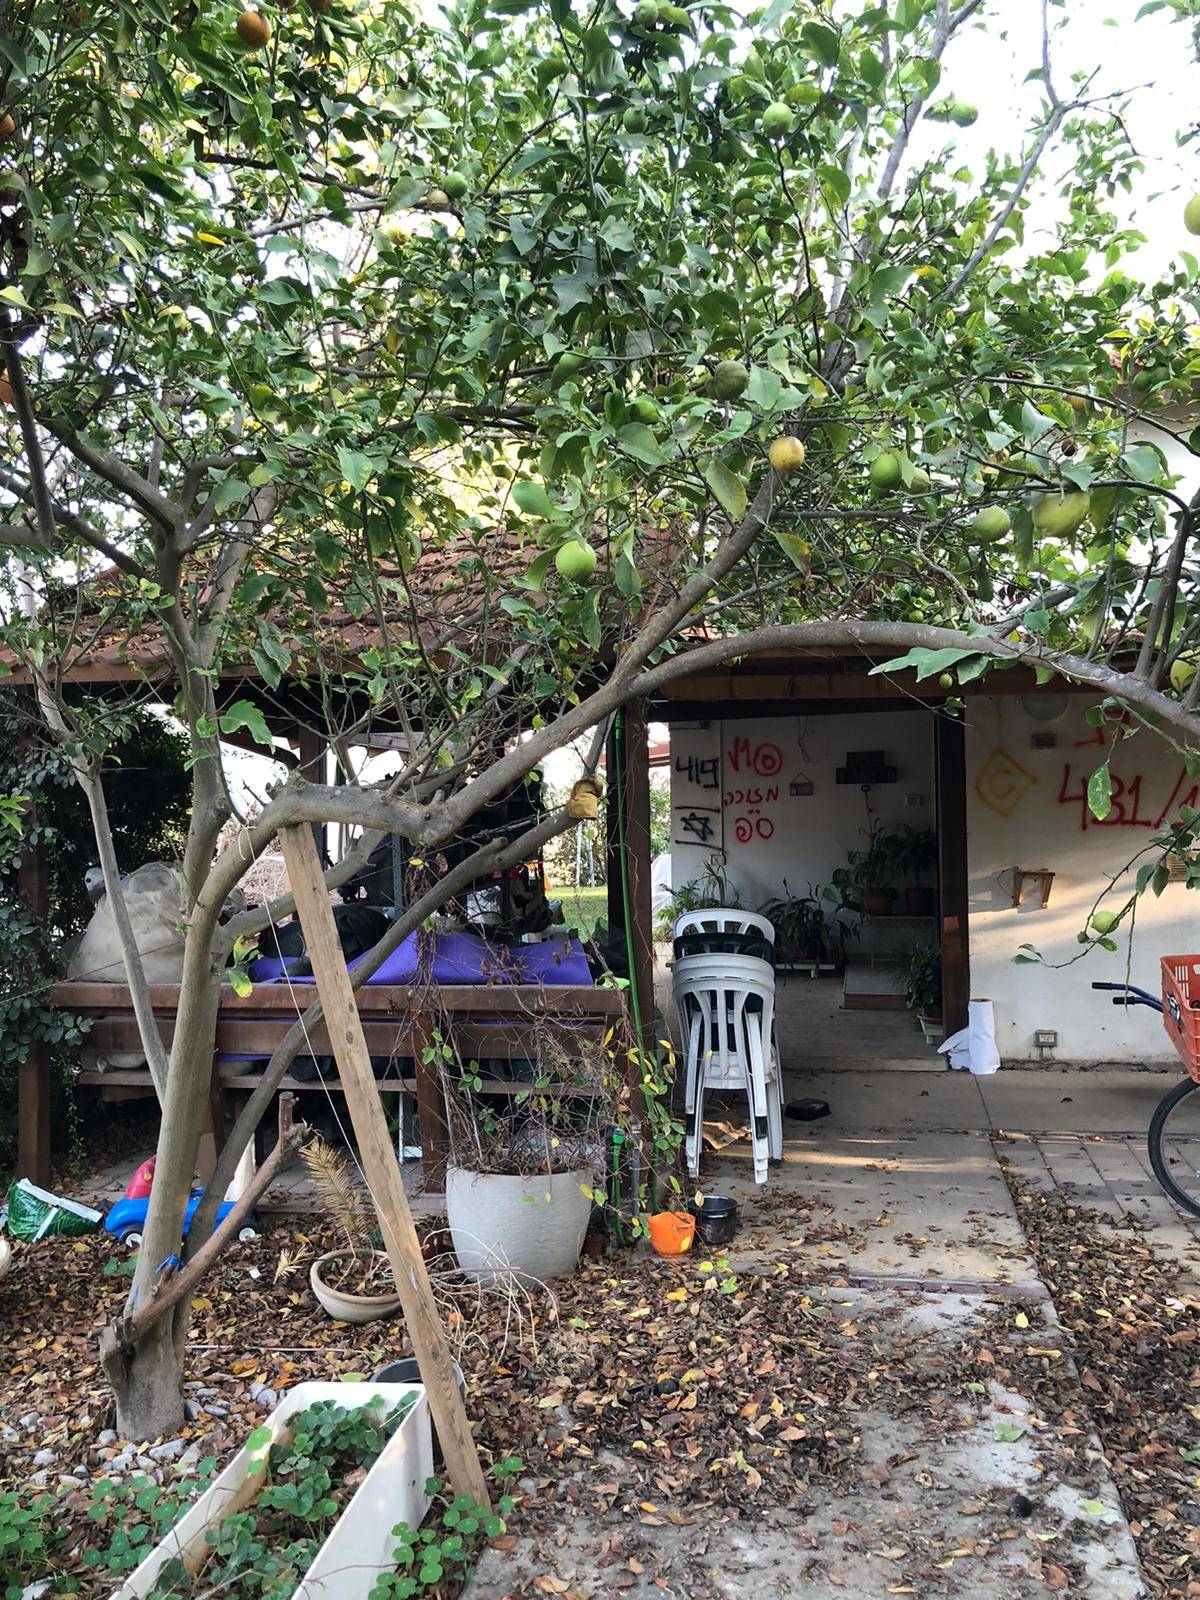 Lemon trees in a yard in Be'eri. The markings on the back wall are from the IDF, and indicate that the ‘coast is clear.’